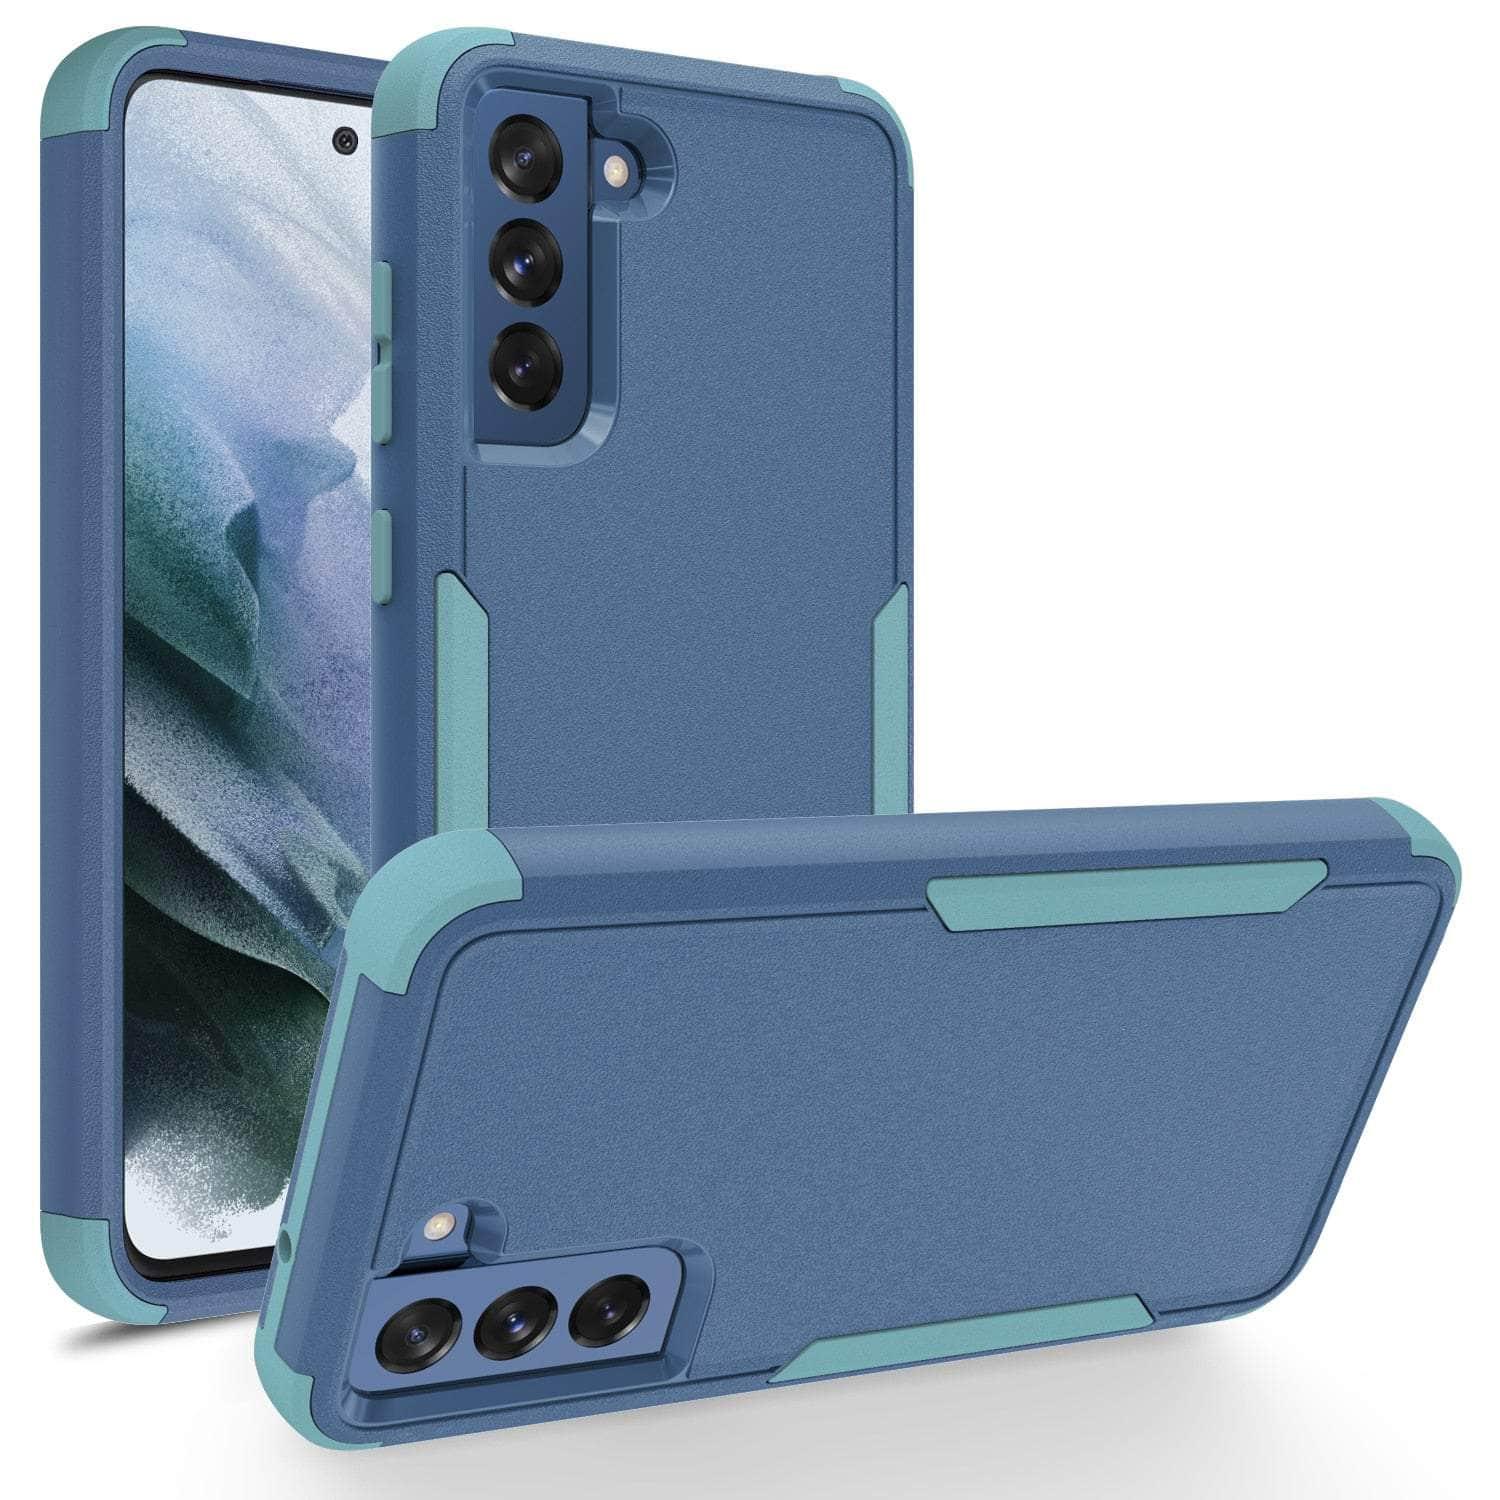 CaseBuddy Australia Casebuddy 3 LayerGalaxy S22 Armor Shockproof Front Protection Bumpers